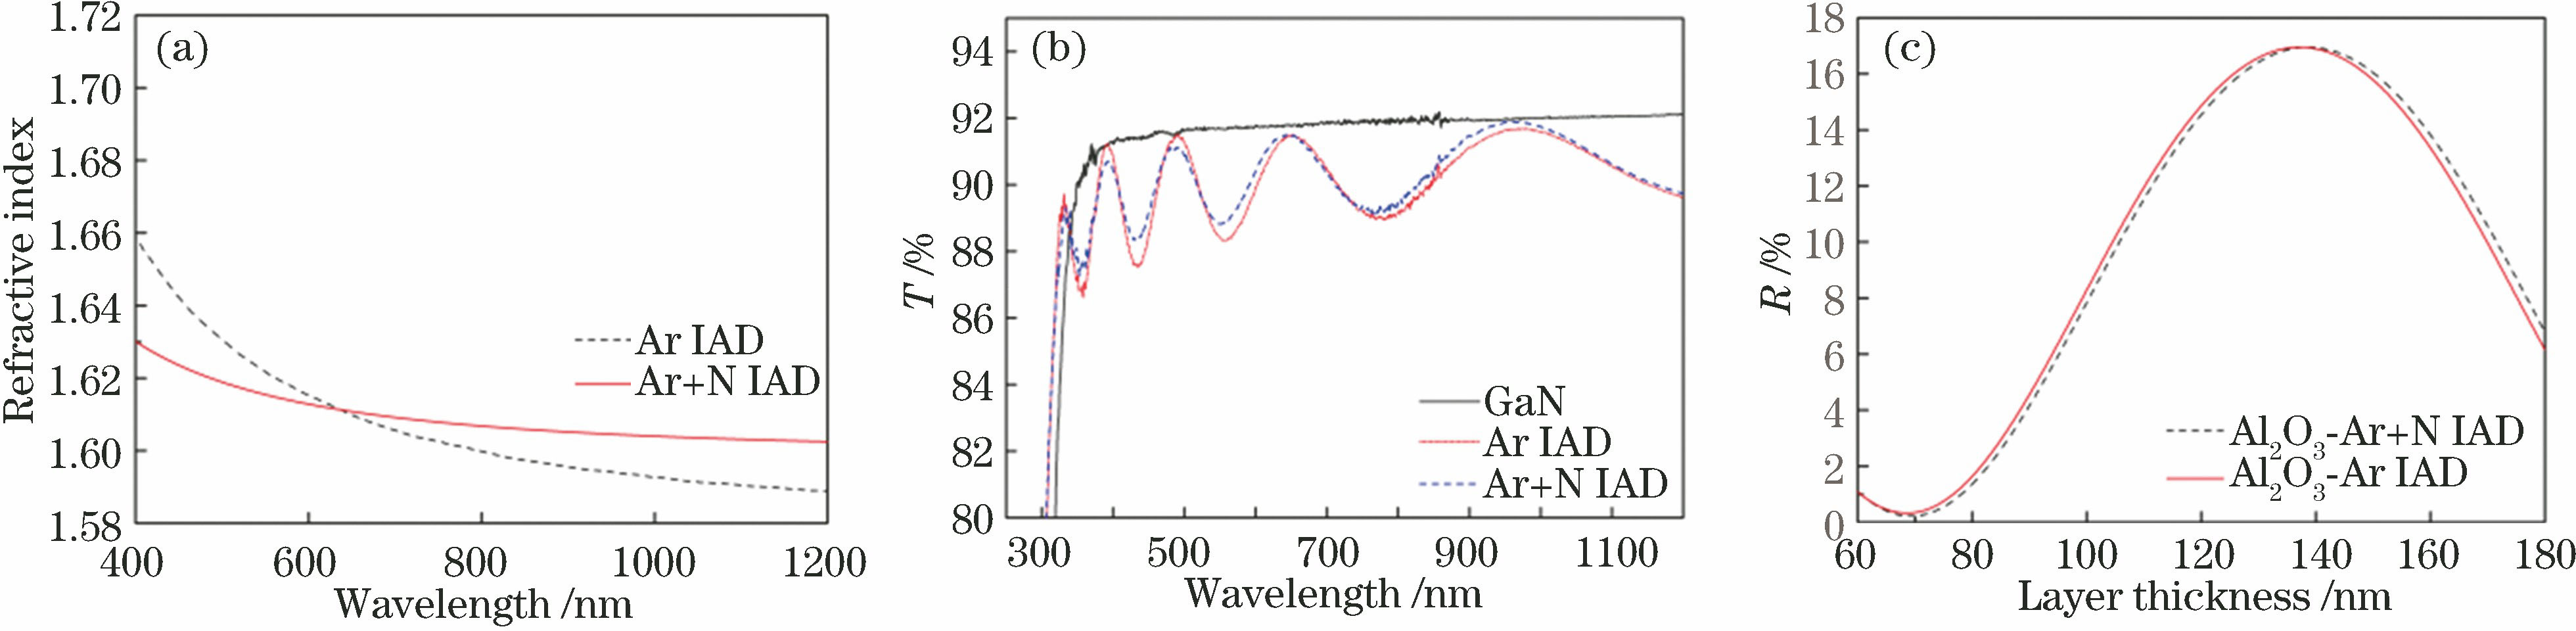 Optical characteristics of film samples under different processing conditions. (a) Transmission curve; (b) optical constant; (c) film thickness versus facet reflectivity